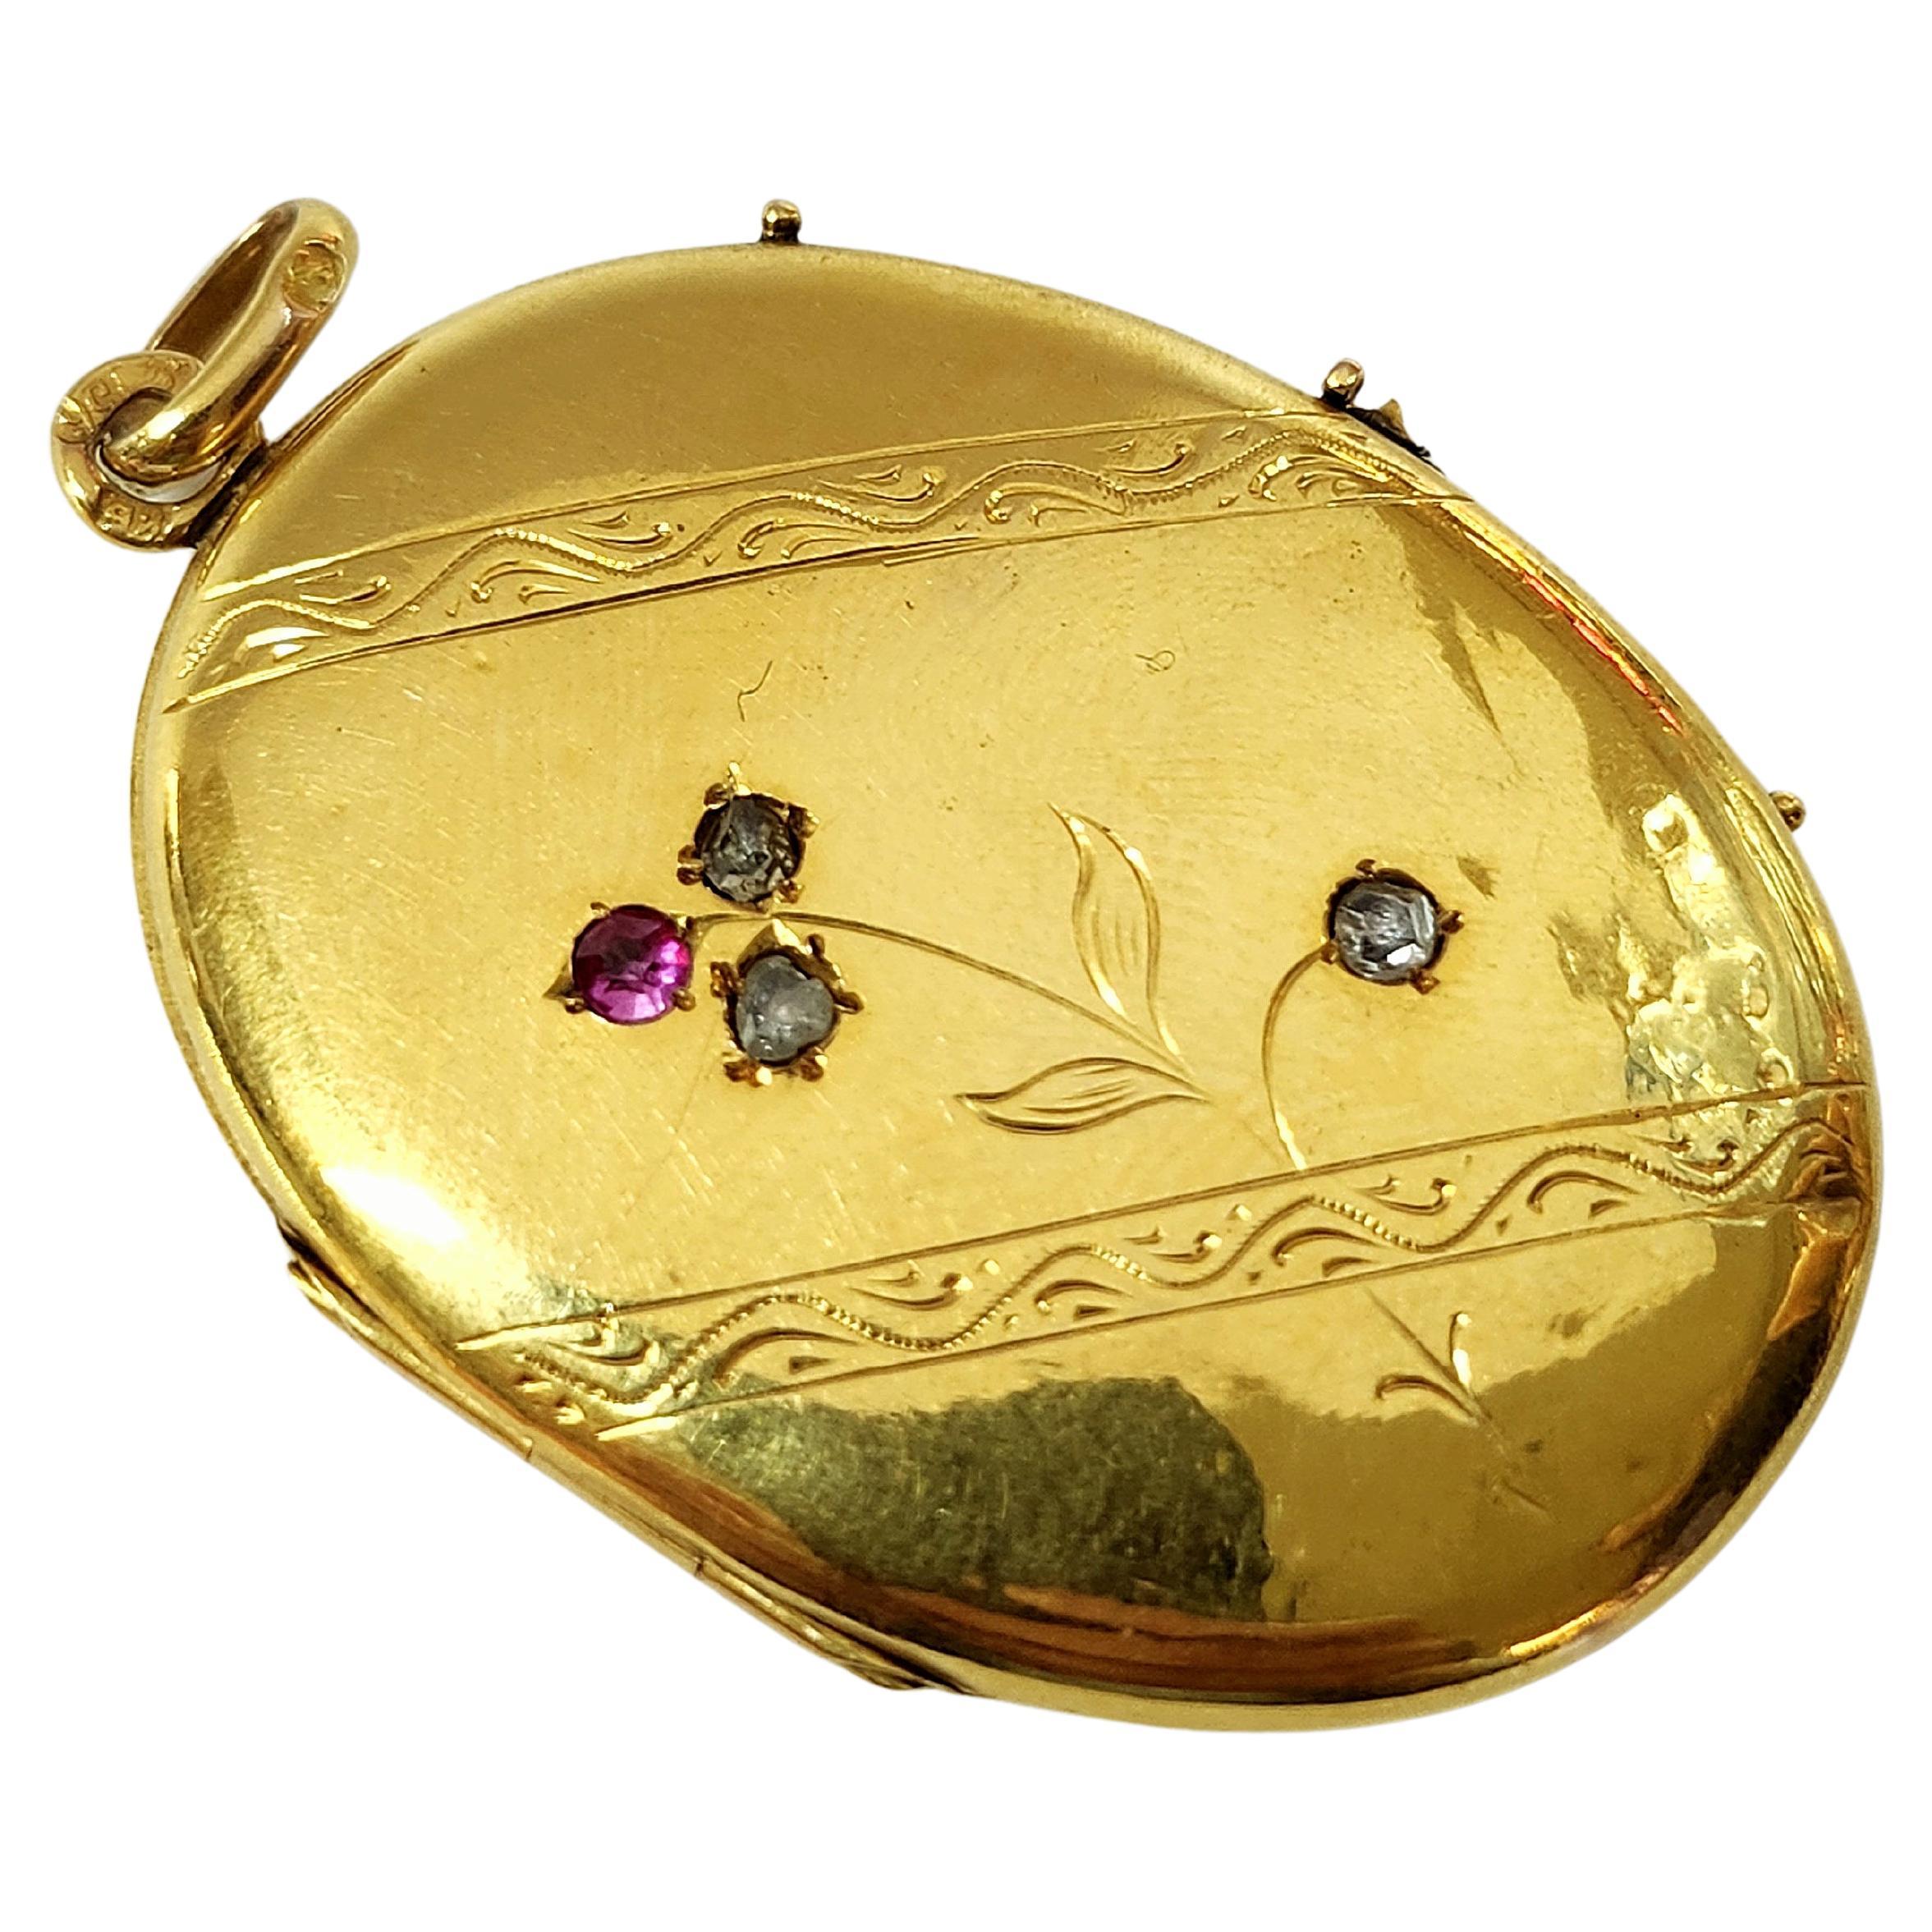 Antique 14k gold russian large locket pendent engraved detailed work centered with rose cut diaminds and ruby pendentif was made in odessa during the imperial russian era 1880.c hall marked 56 imperial russian gold standard and odessa assay mark and